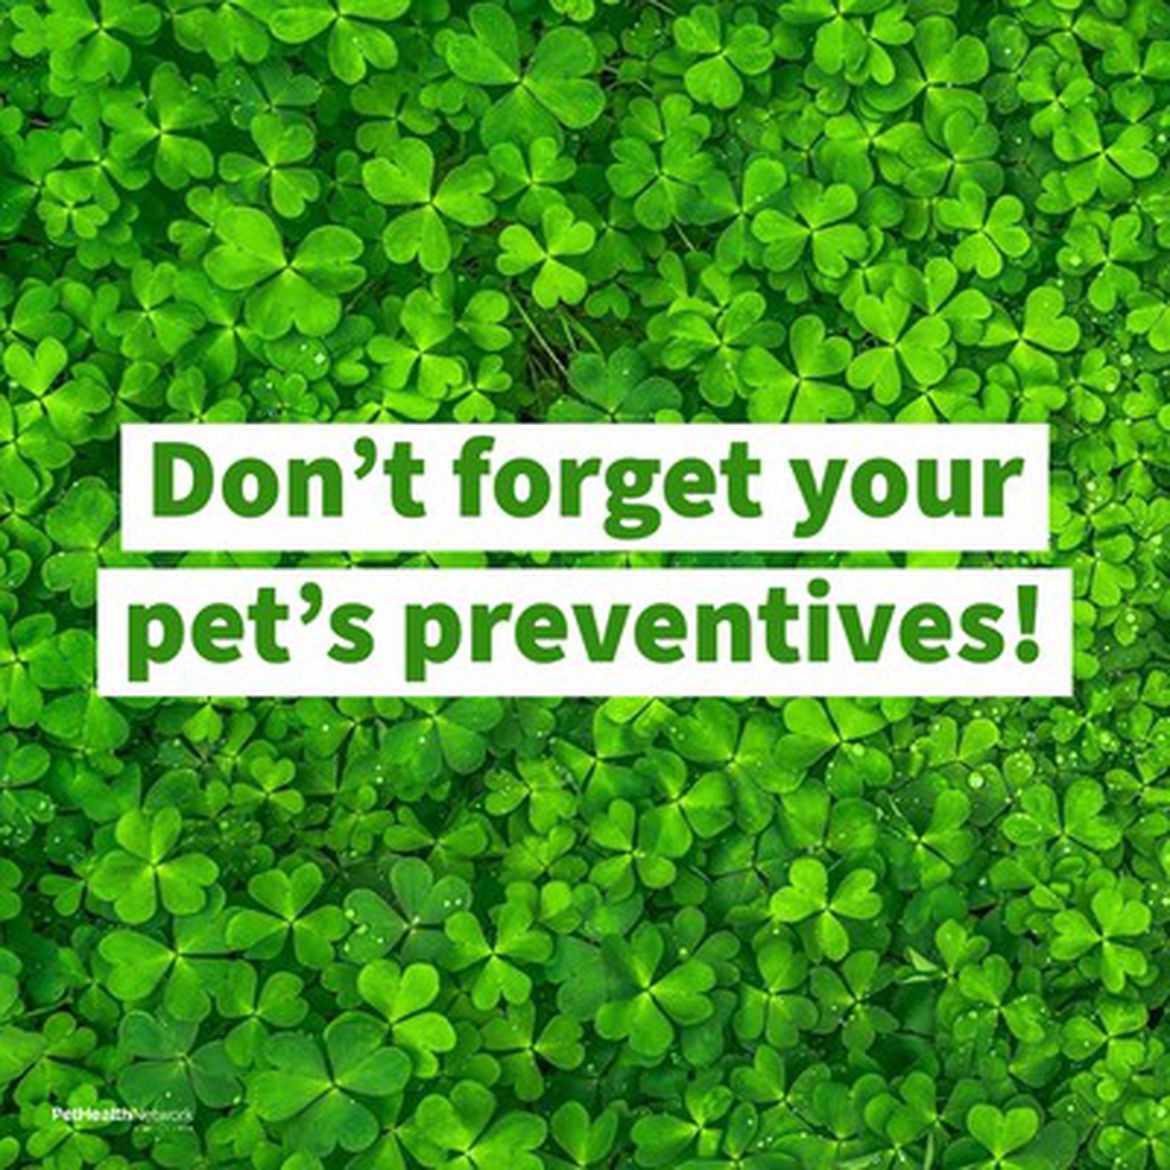 Social media post for a reminder to give pet's preventives.